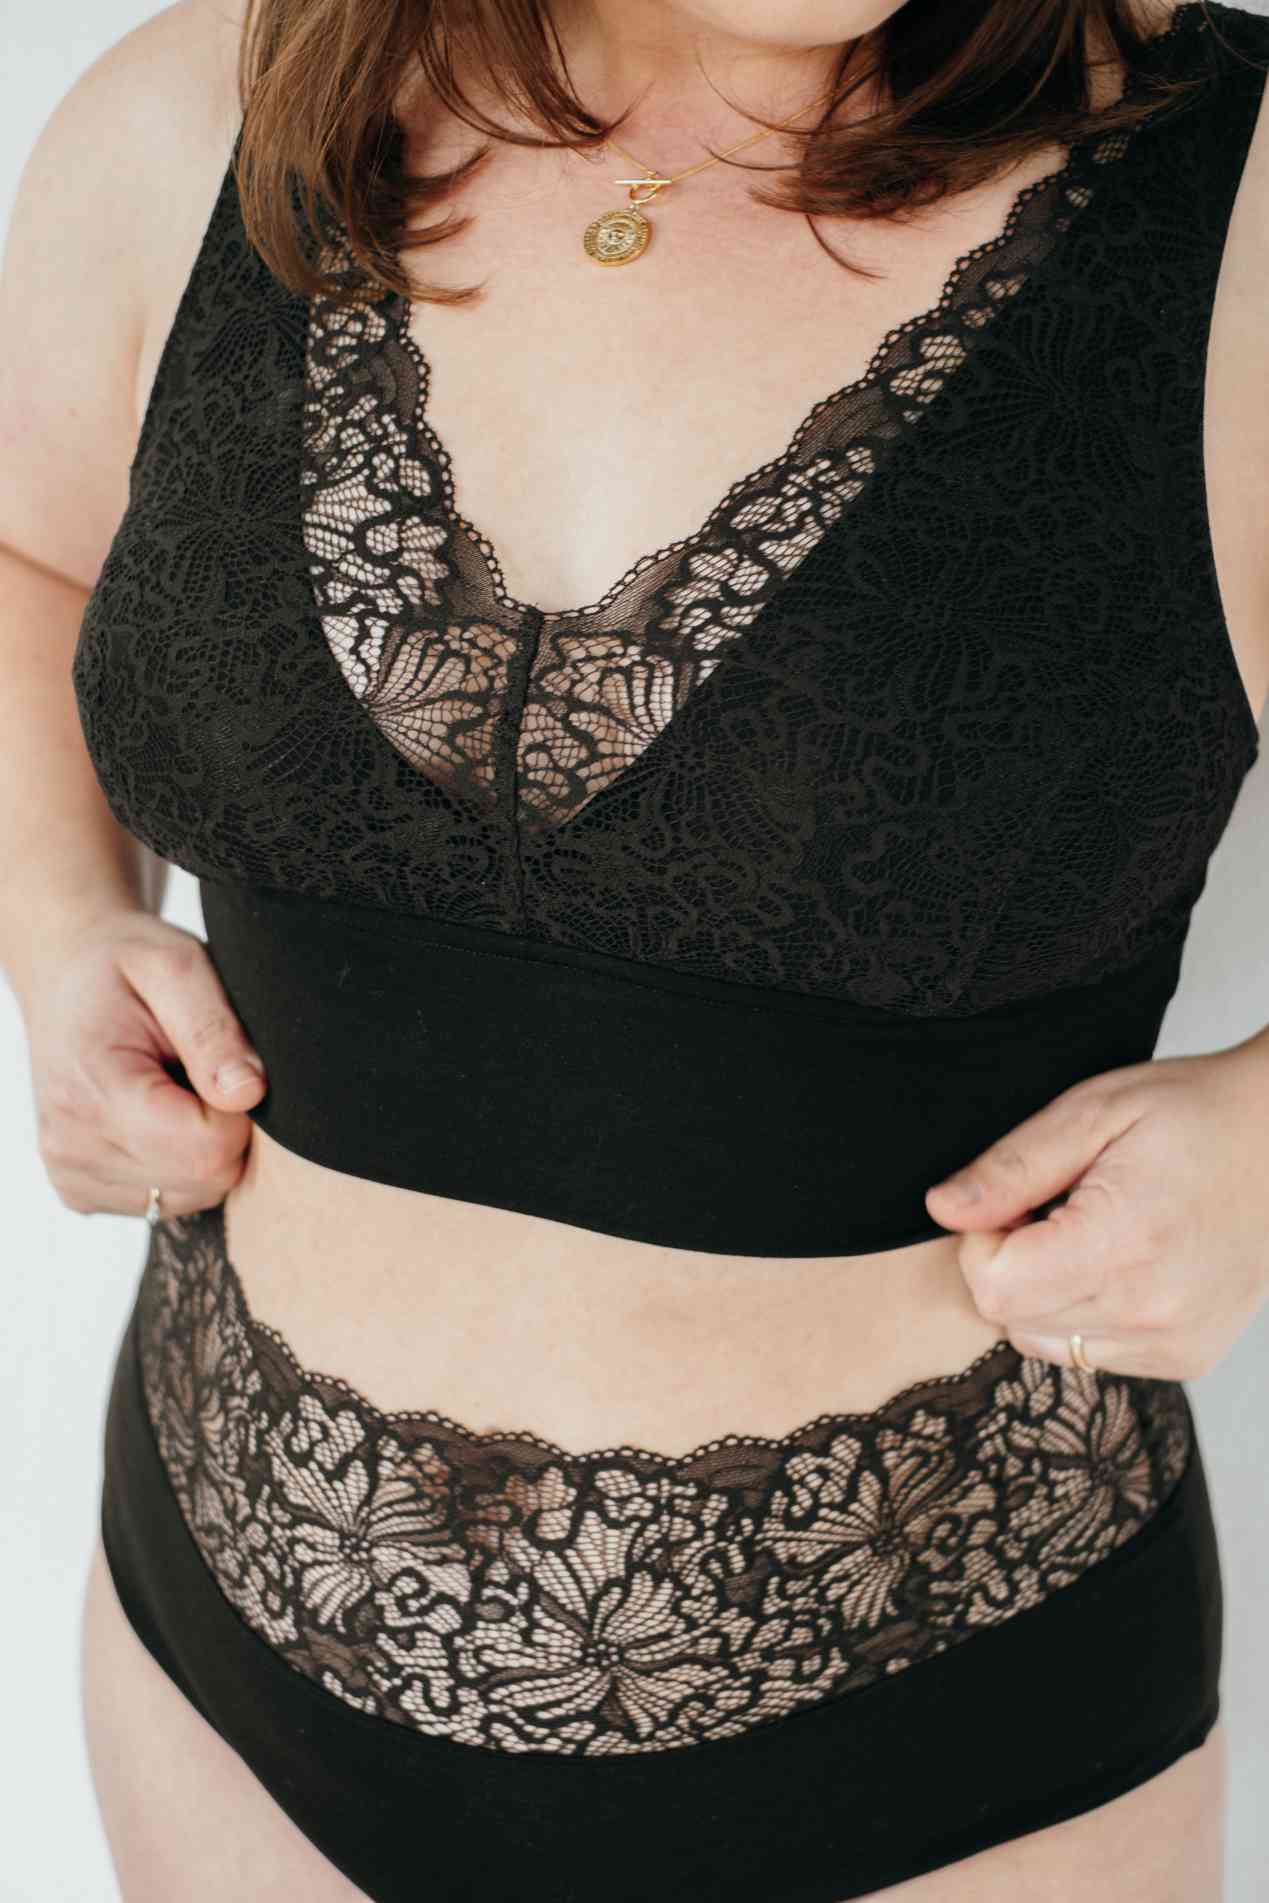 Close-up of black Bralette made of lace with good support.